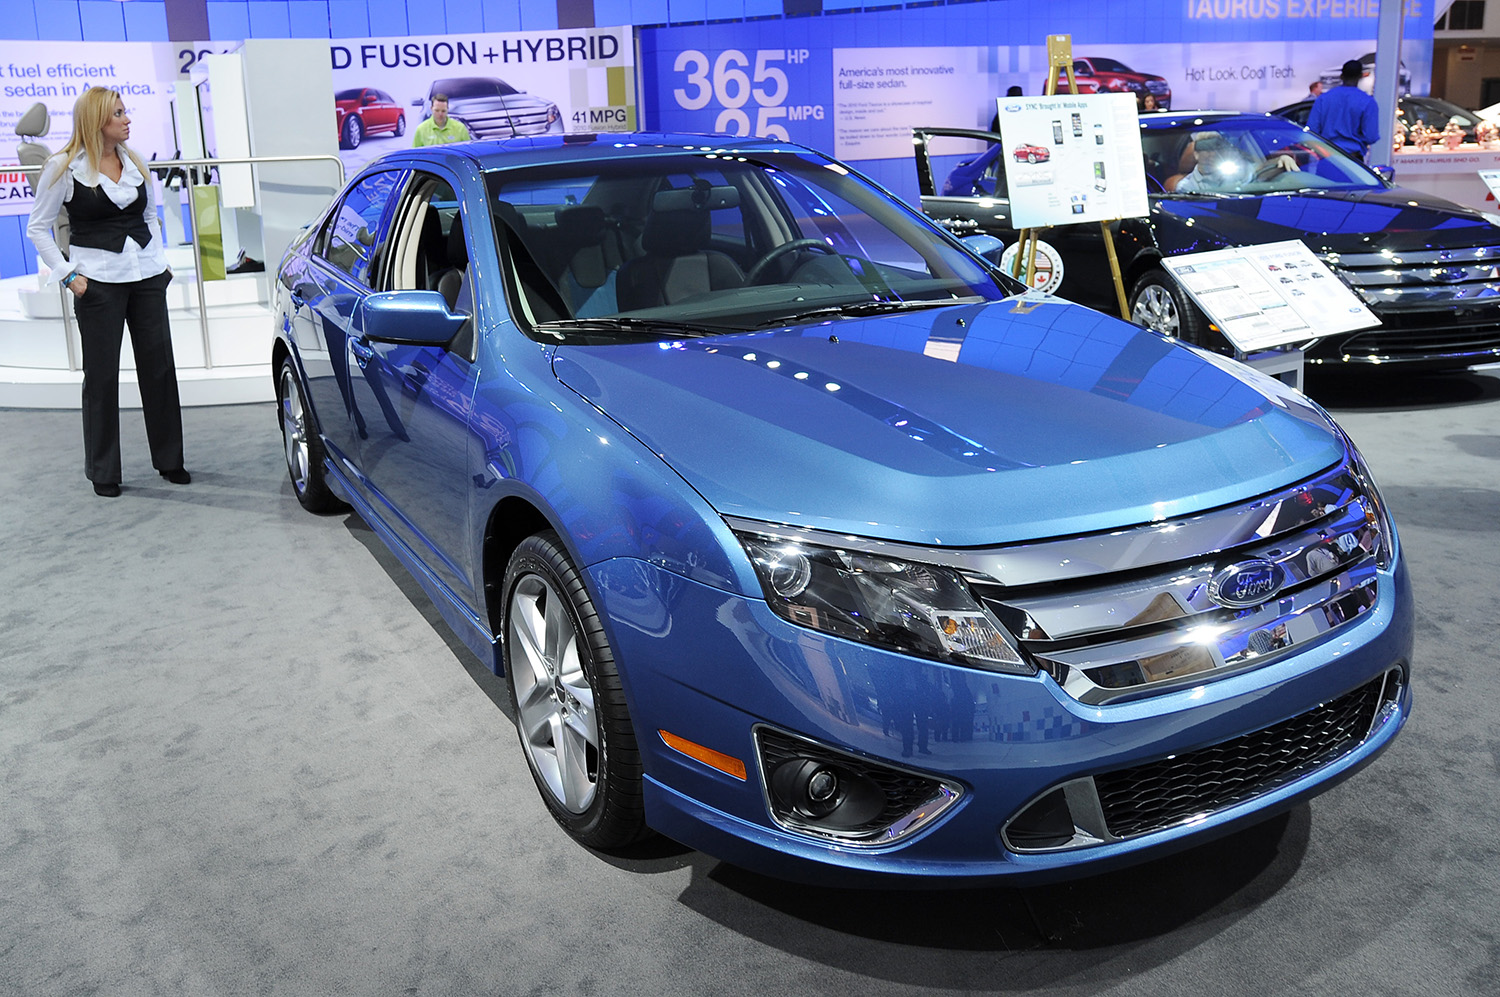 2010 Ford Fusion Hybrid displayed during the second press preview day at the 2010 North American International Auto Show